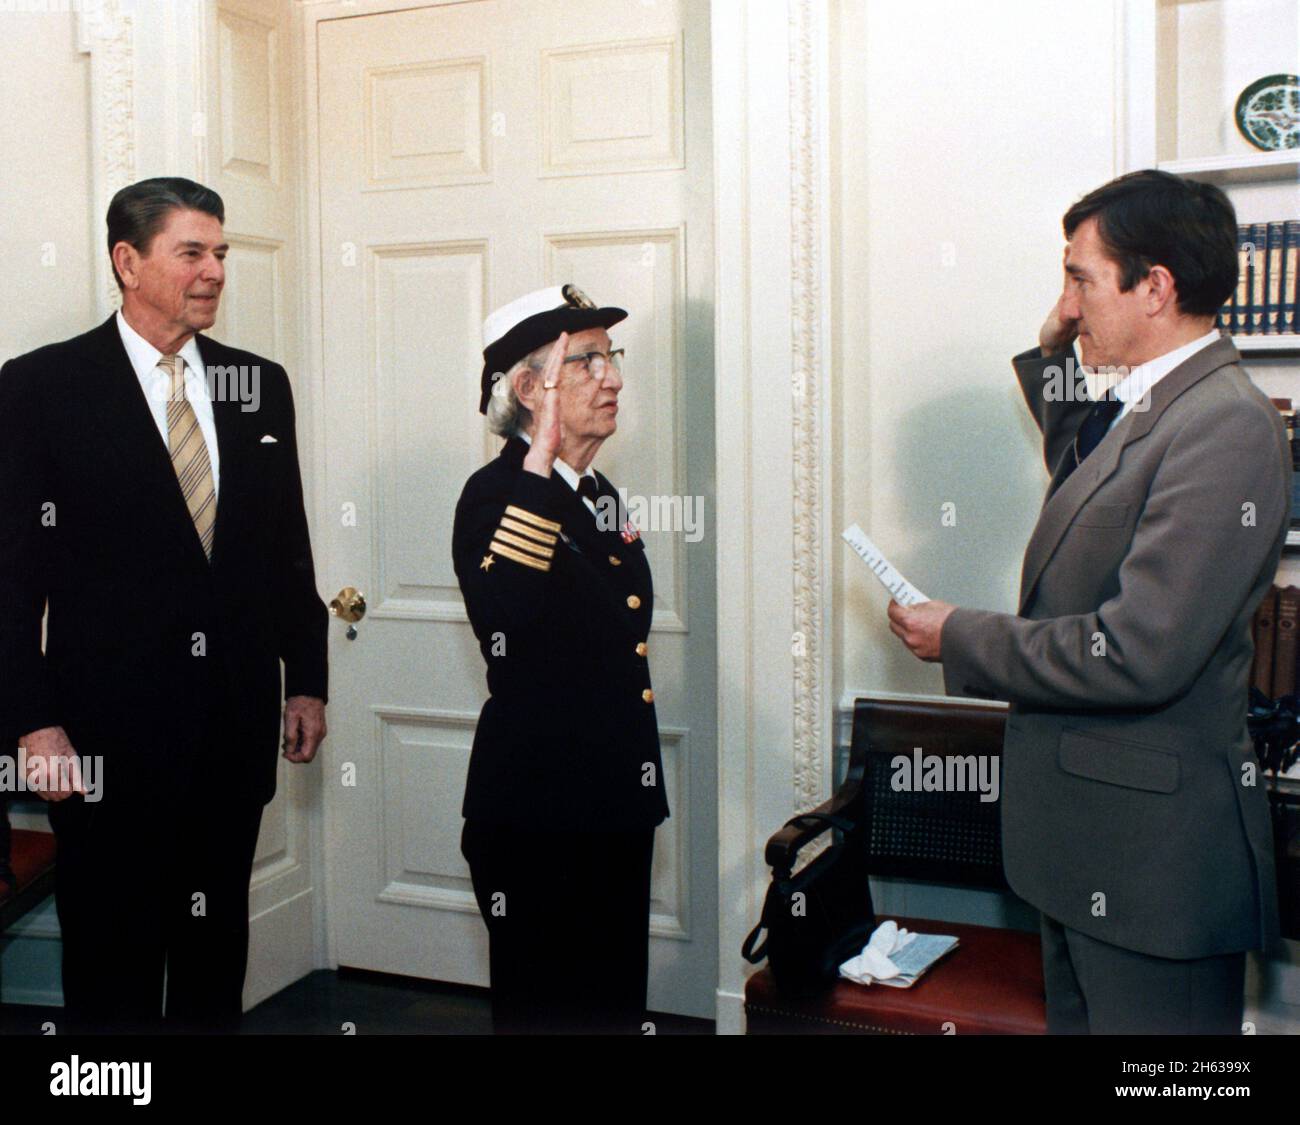 Secretary of the Navy, John Lehman, right, promotes Capt. Grace Hopper to the rank of commodore in a ceremony at the White House.  President Ronald Reagan is at the left. Stock Photo